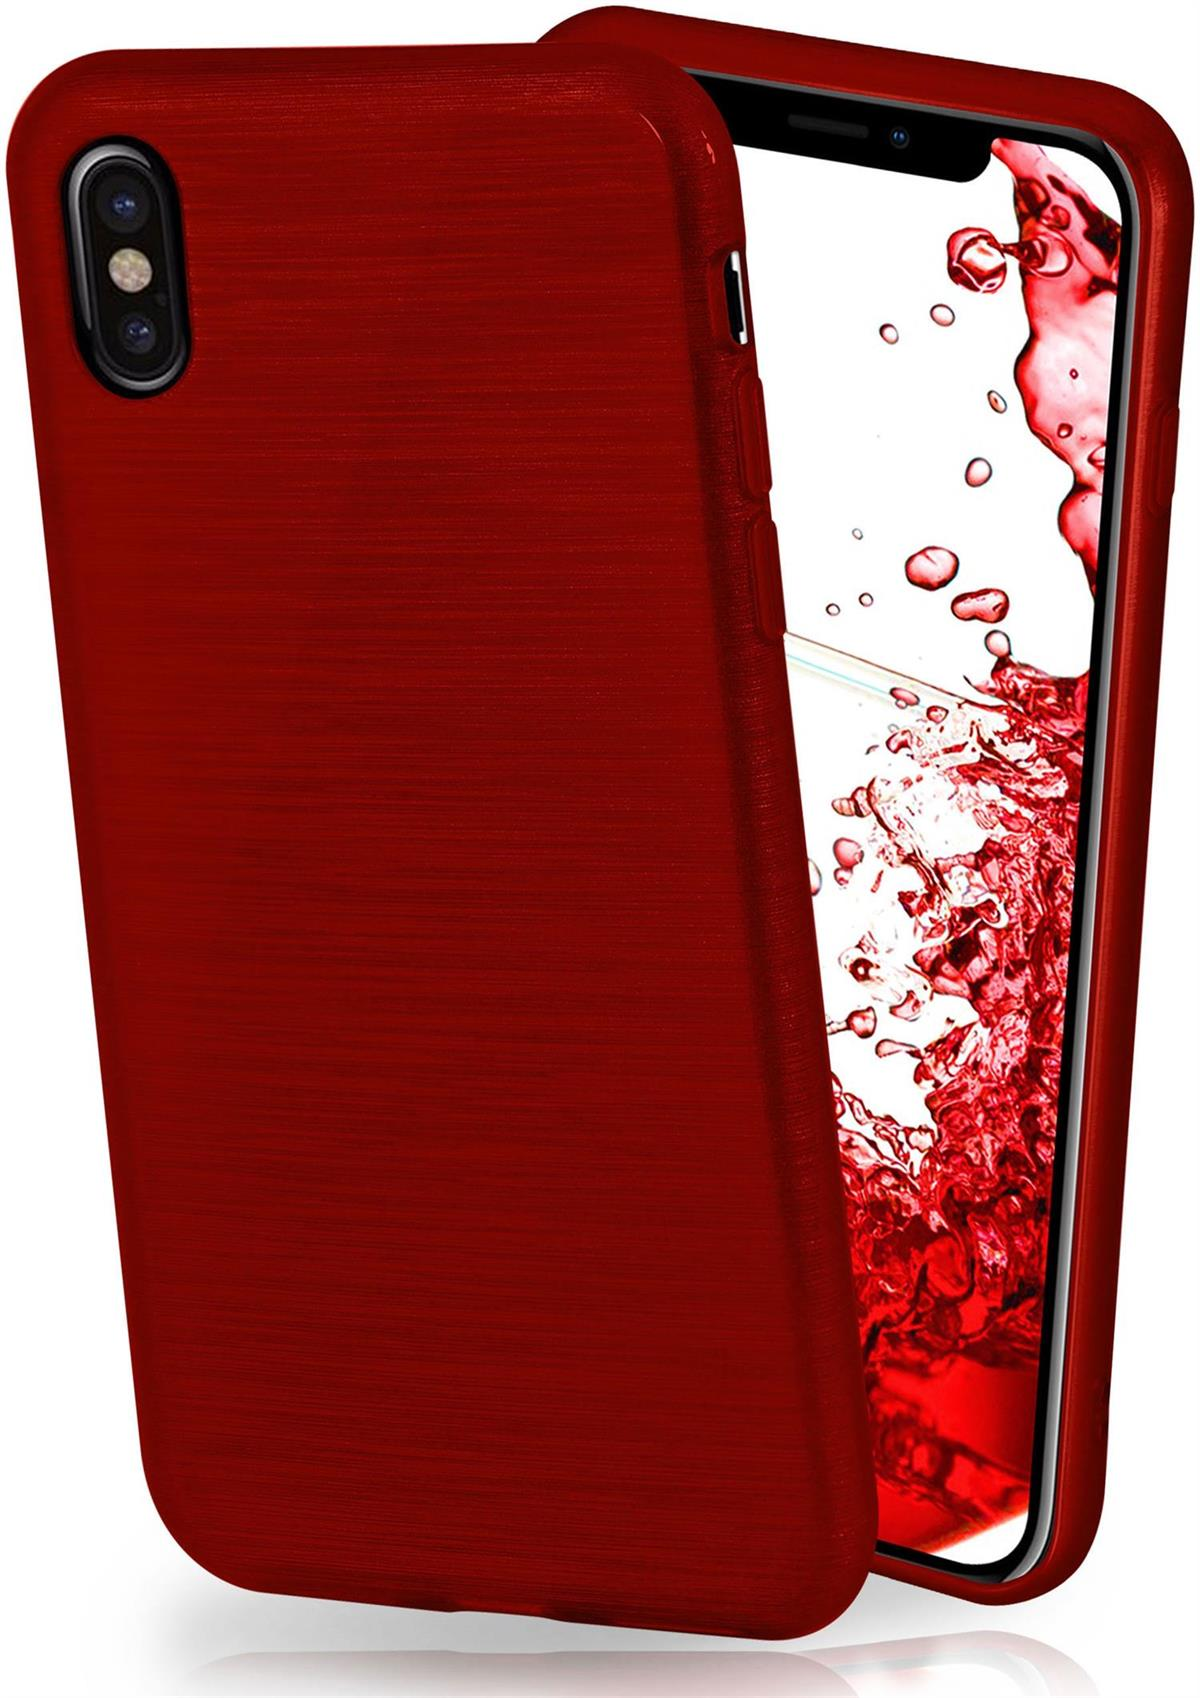 Case, Backcover, MOEX iPhone Apple, Crimson-Red Brushed XS,